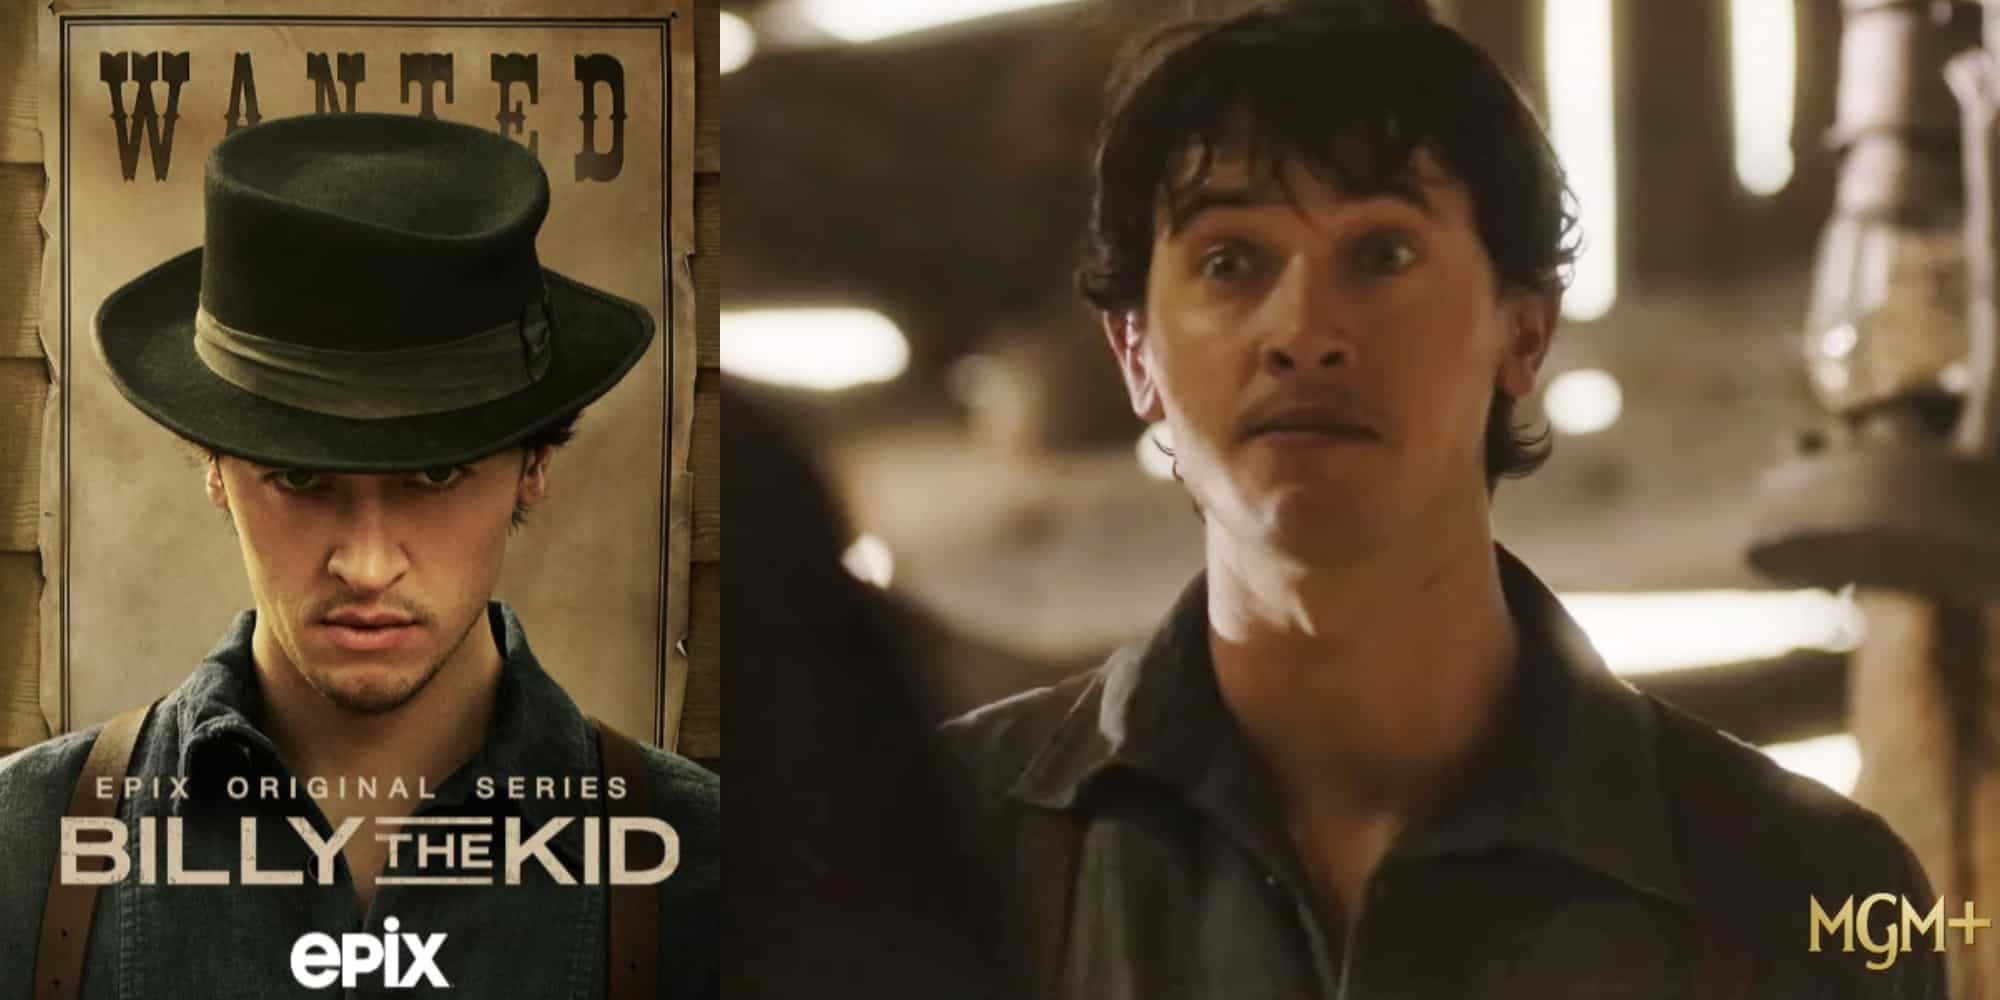 Billy The Kid Season 2 Episode 1: Release Date, Spoilers & Where To Watch